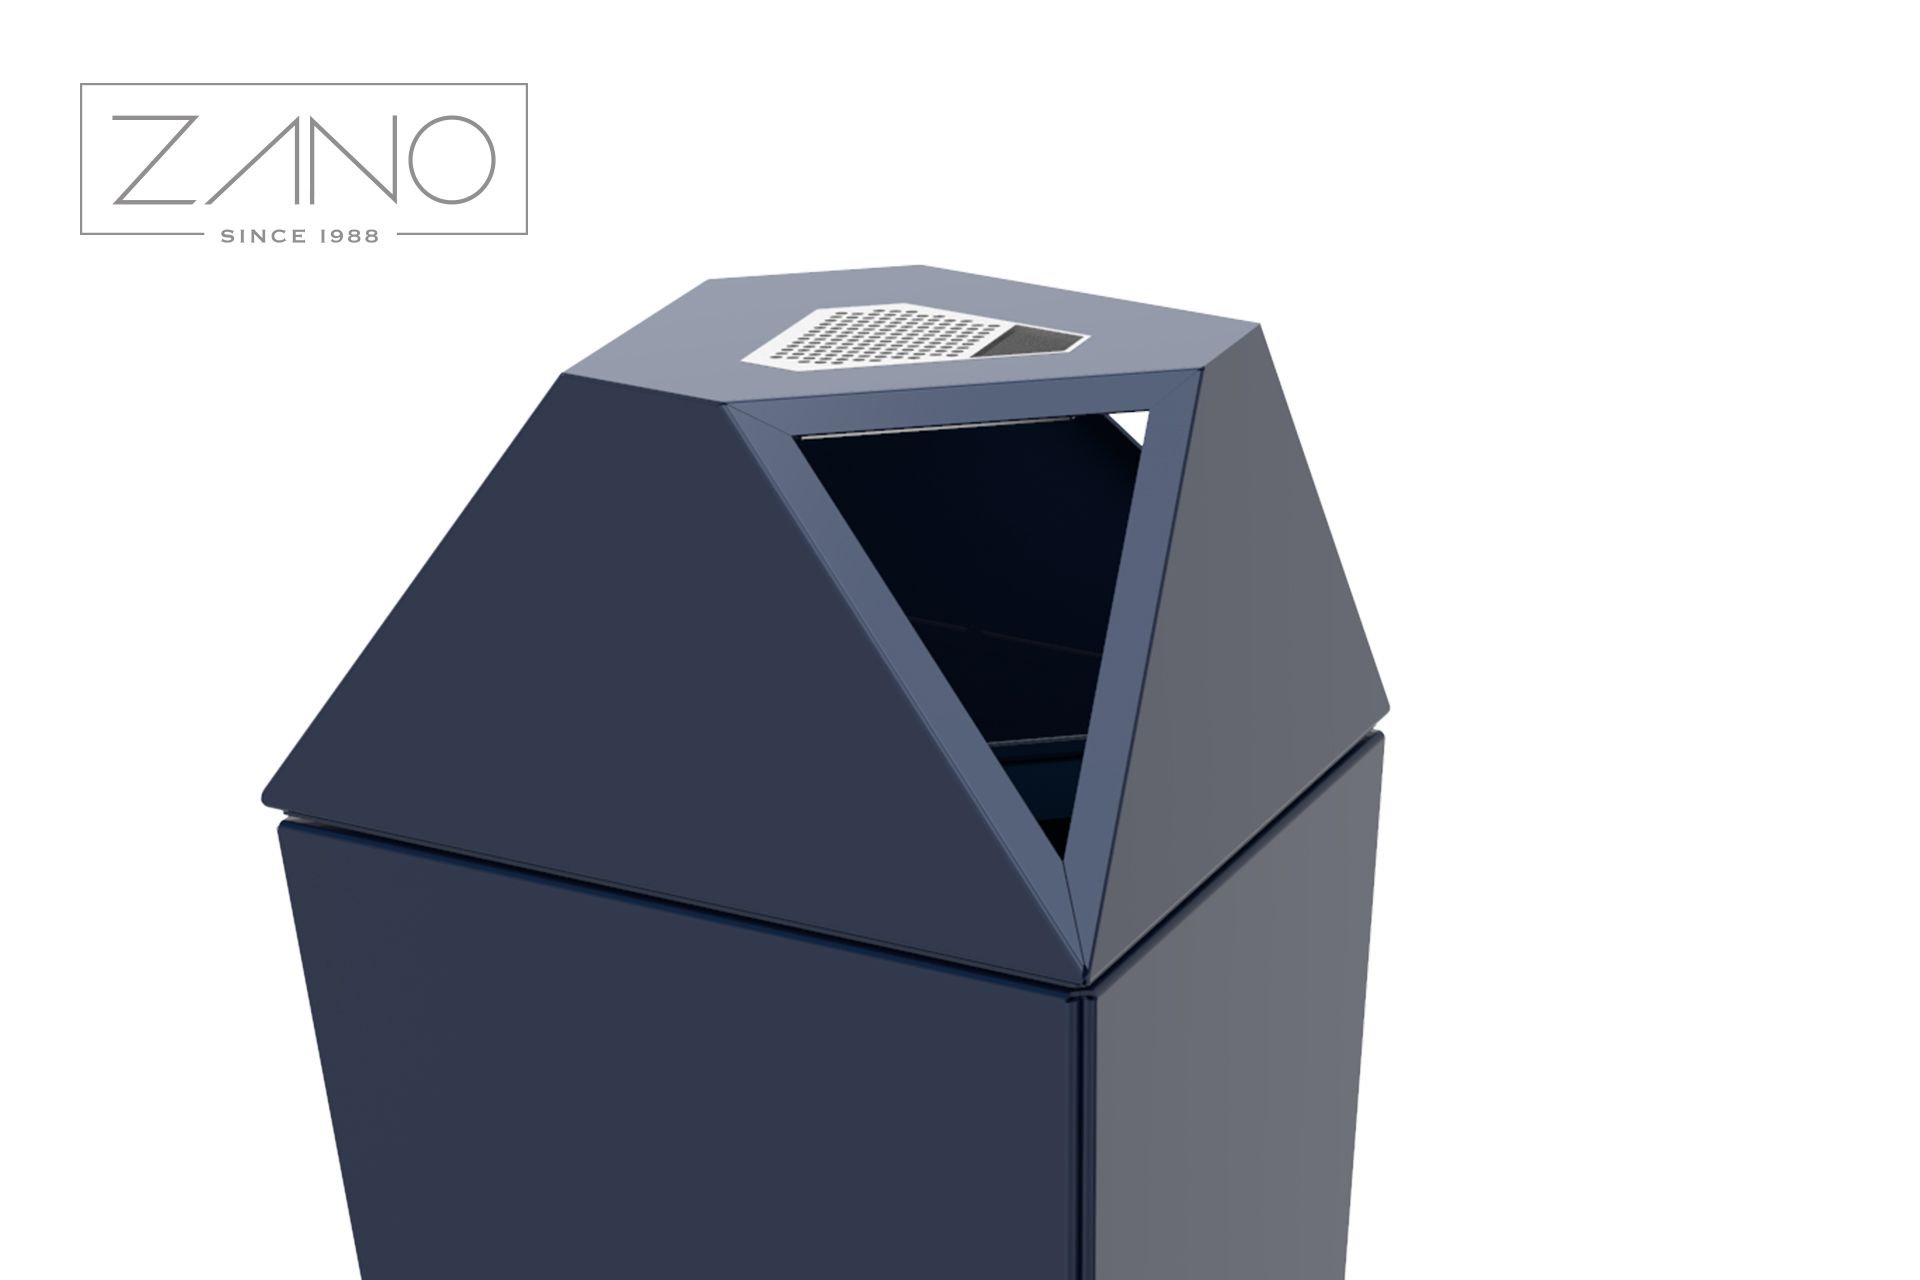 IVO outdoor public trash bin with stainless steel ashtray